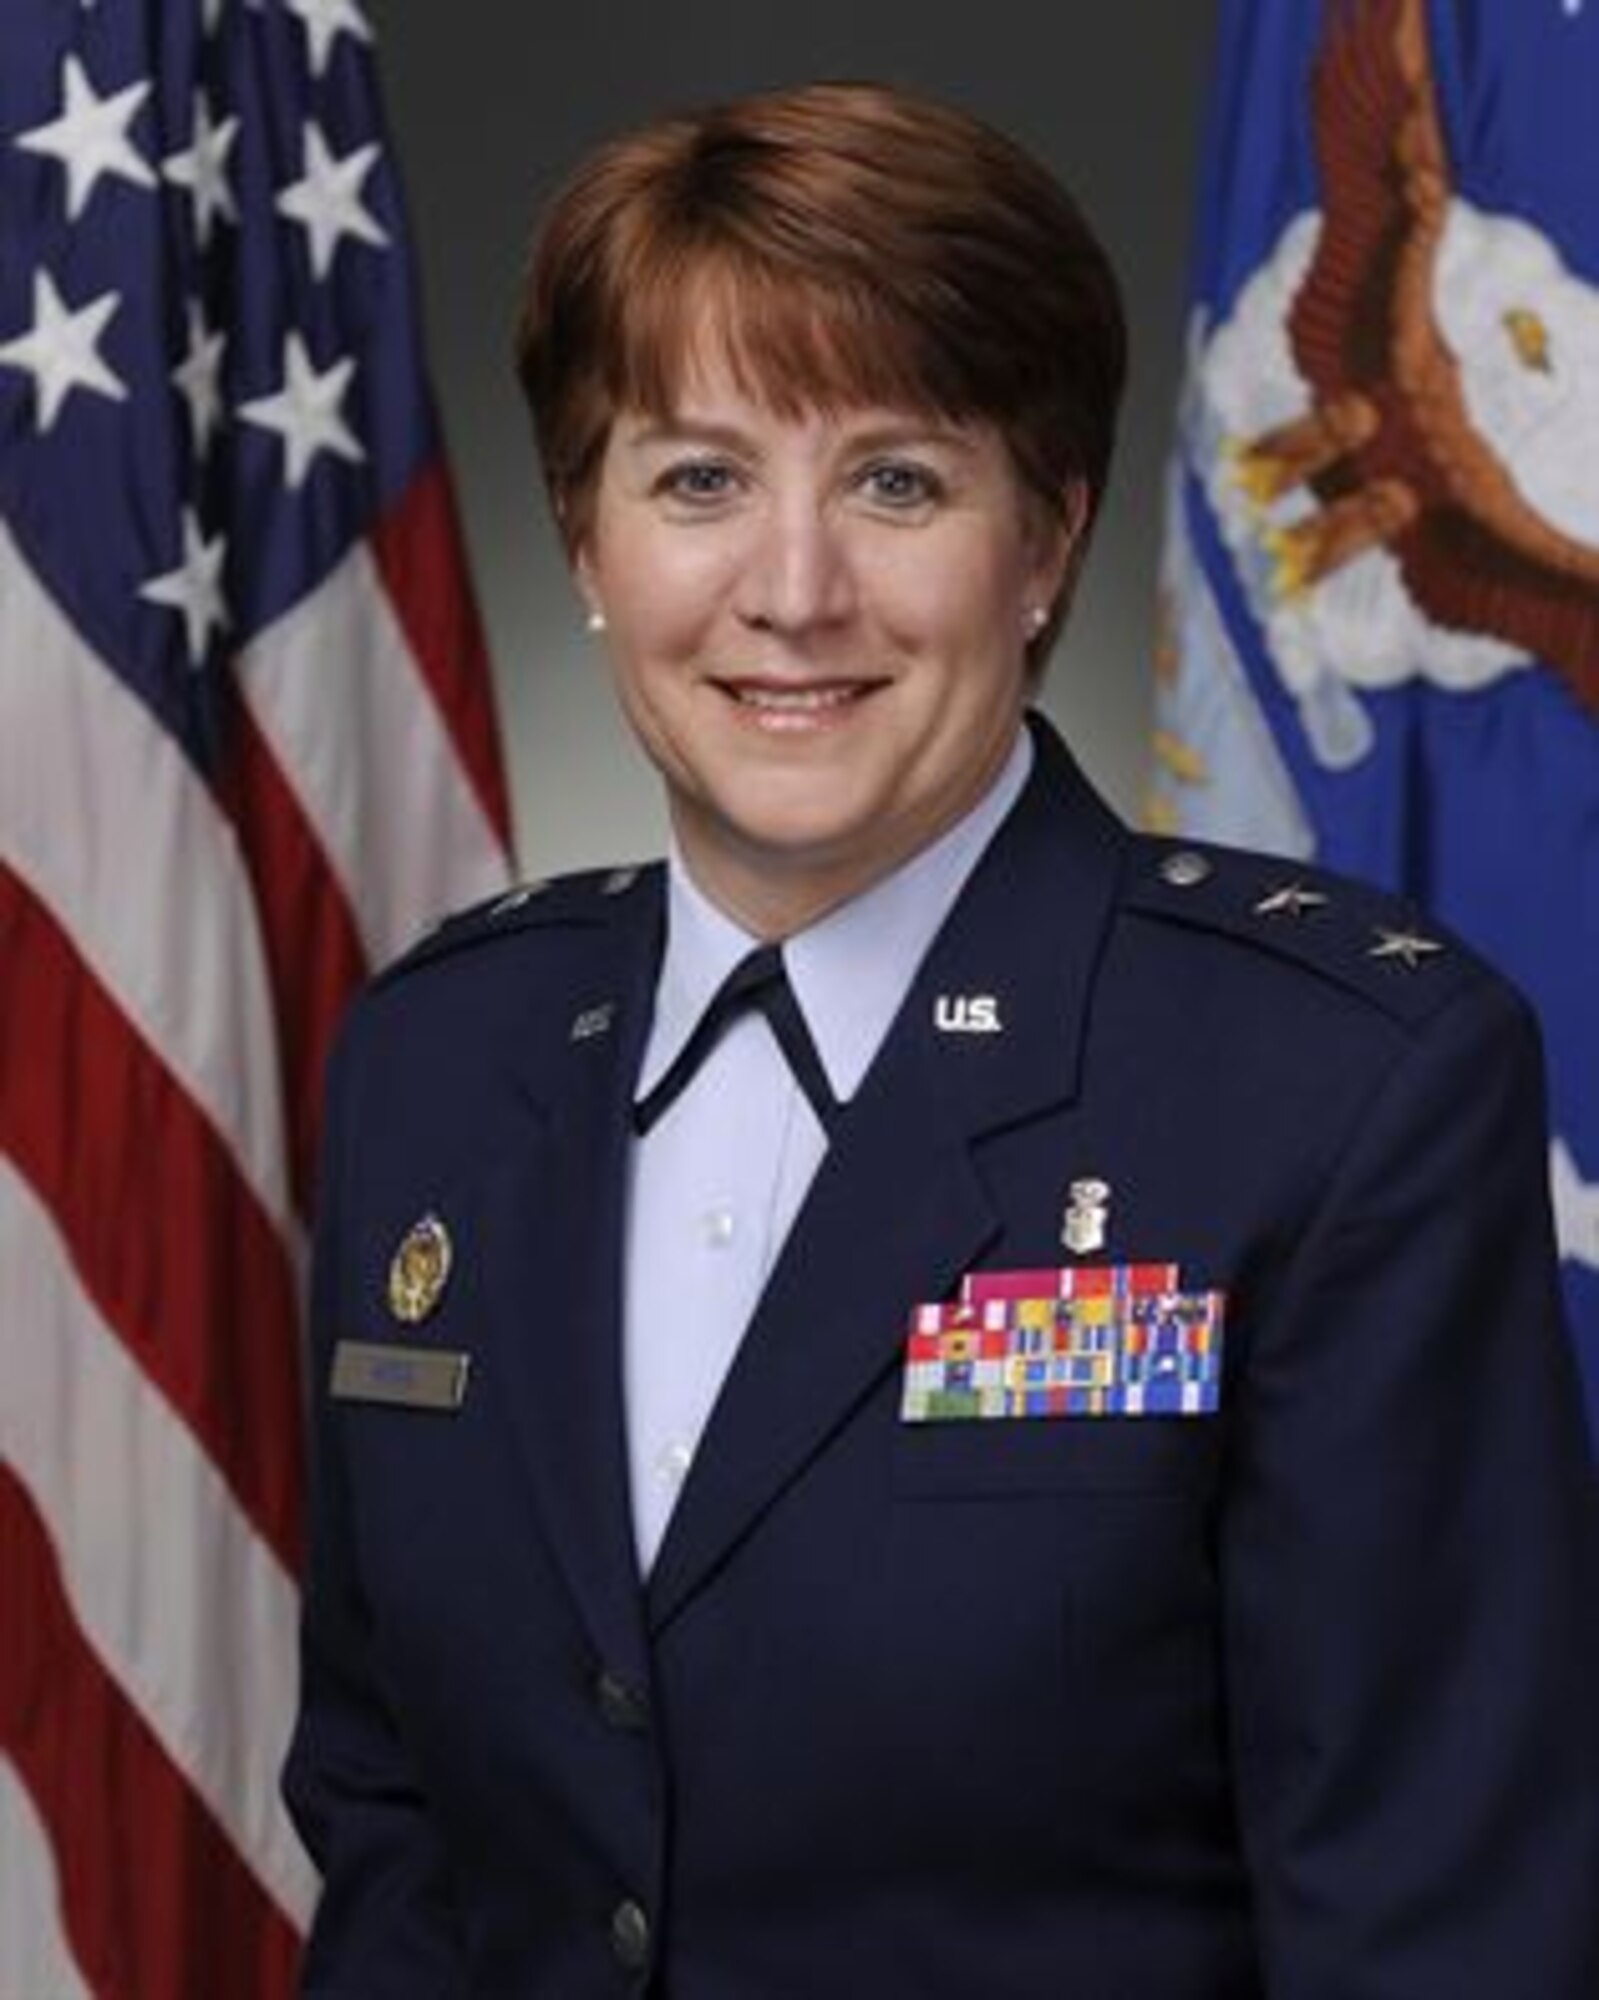 Air Force Deputy Surgeon General Maj. Gen. Dorothy Hogg testified before the House Armed Services Subcommittee on Military Personnel, during the “Ensuring Medical Readiness in the Future,” hearing on Feb. 26, at the Rayburn House Office Building, in Washington, D.C. (U.S. Air Force photo)